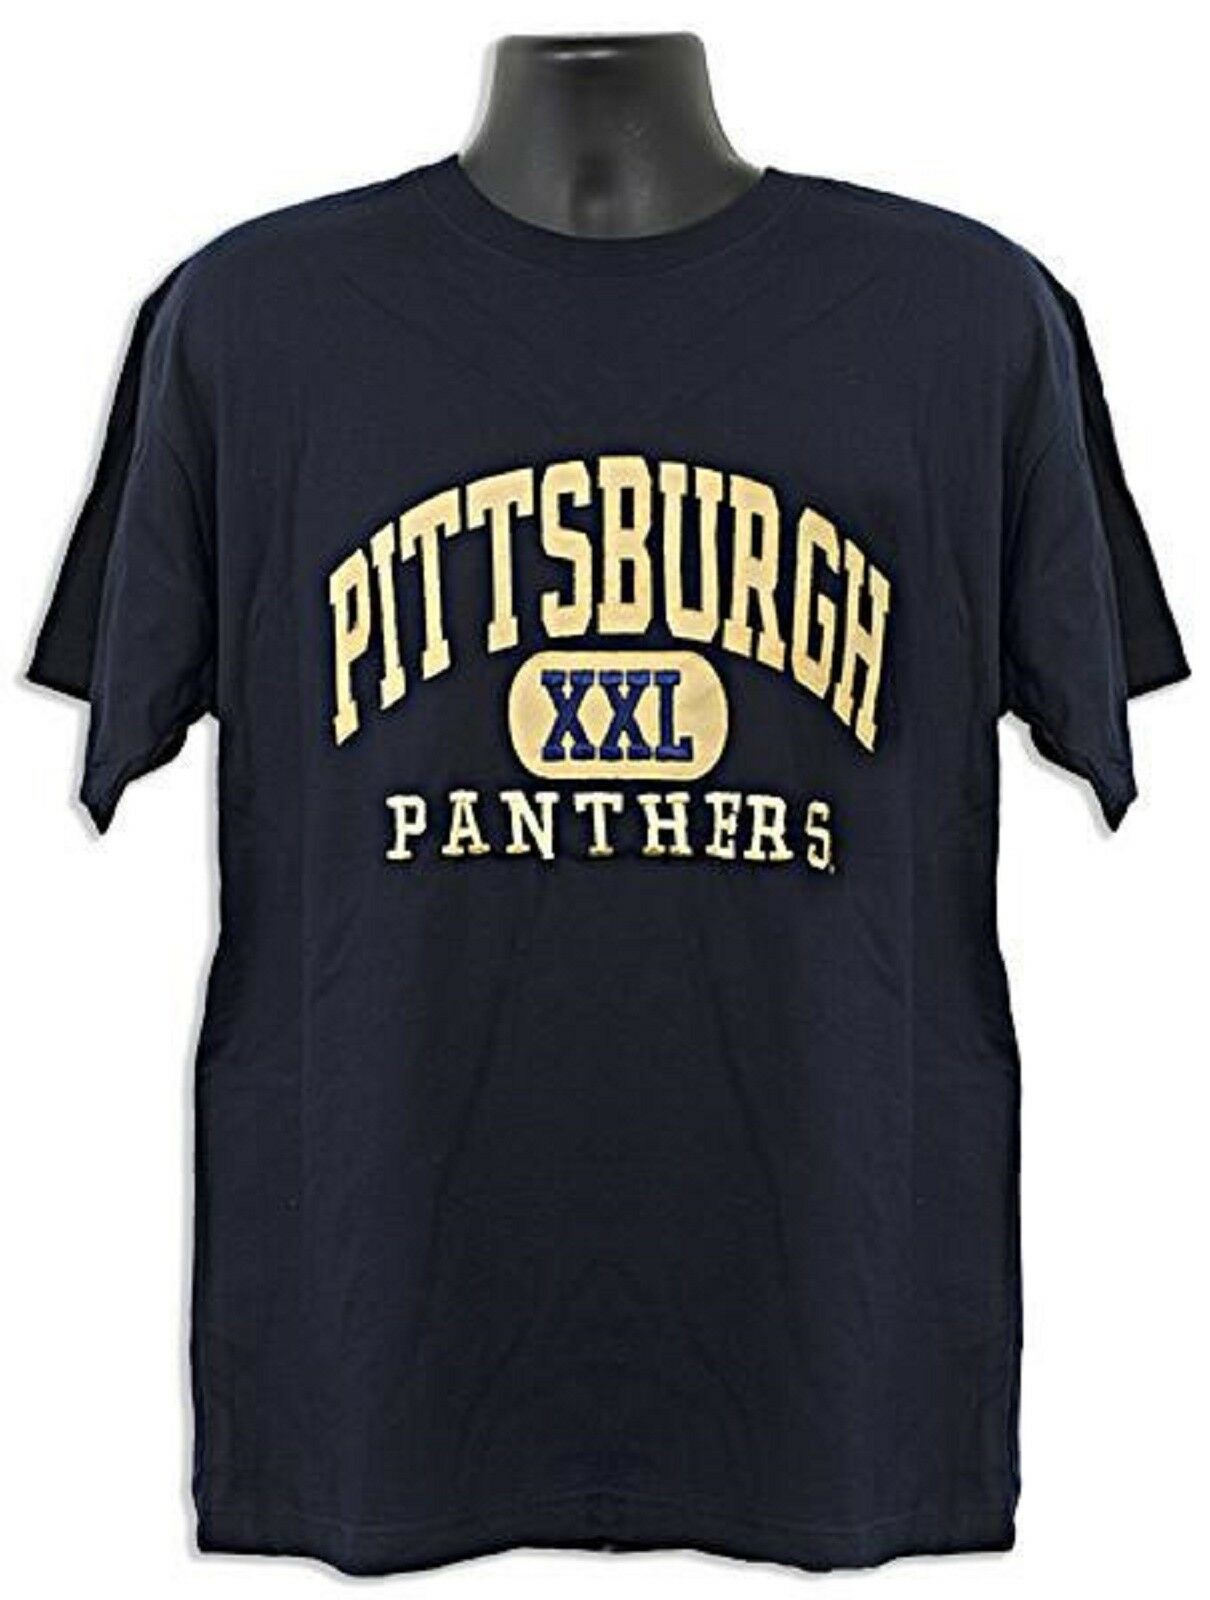 University of Pittsburgh Panthers Navy Blue Arch Shirt XL - $9.99